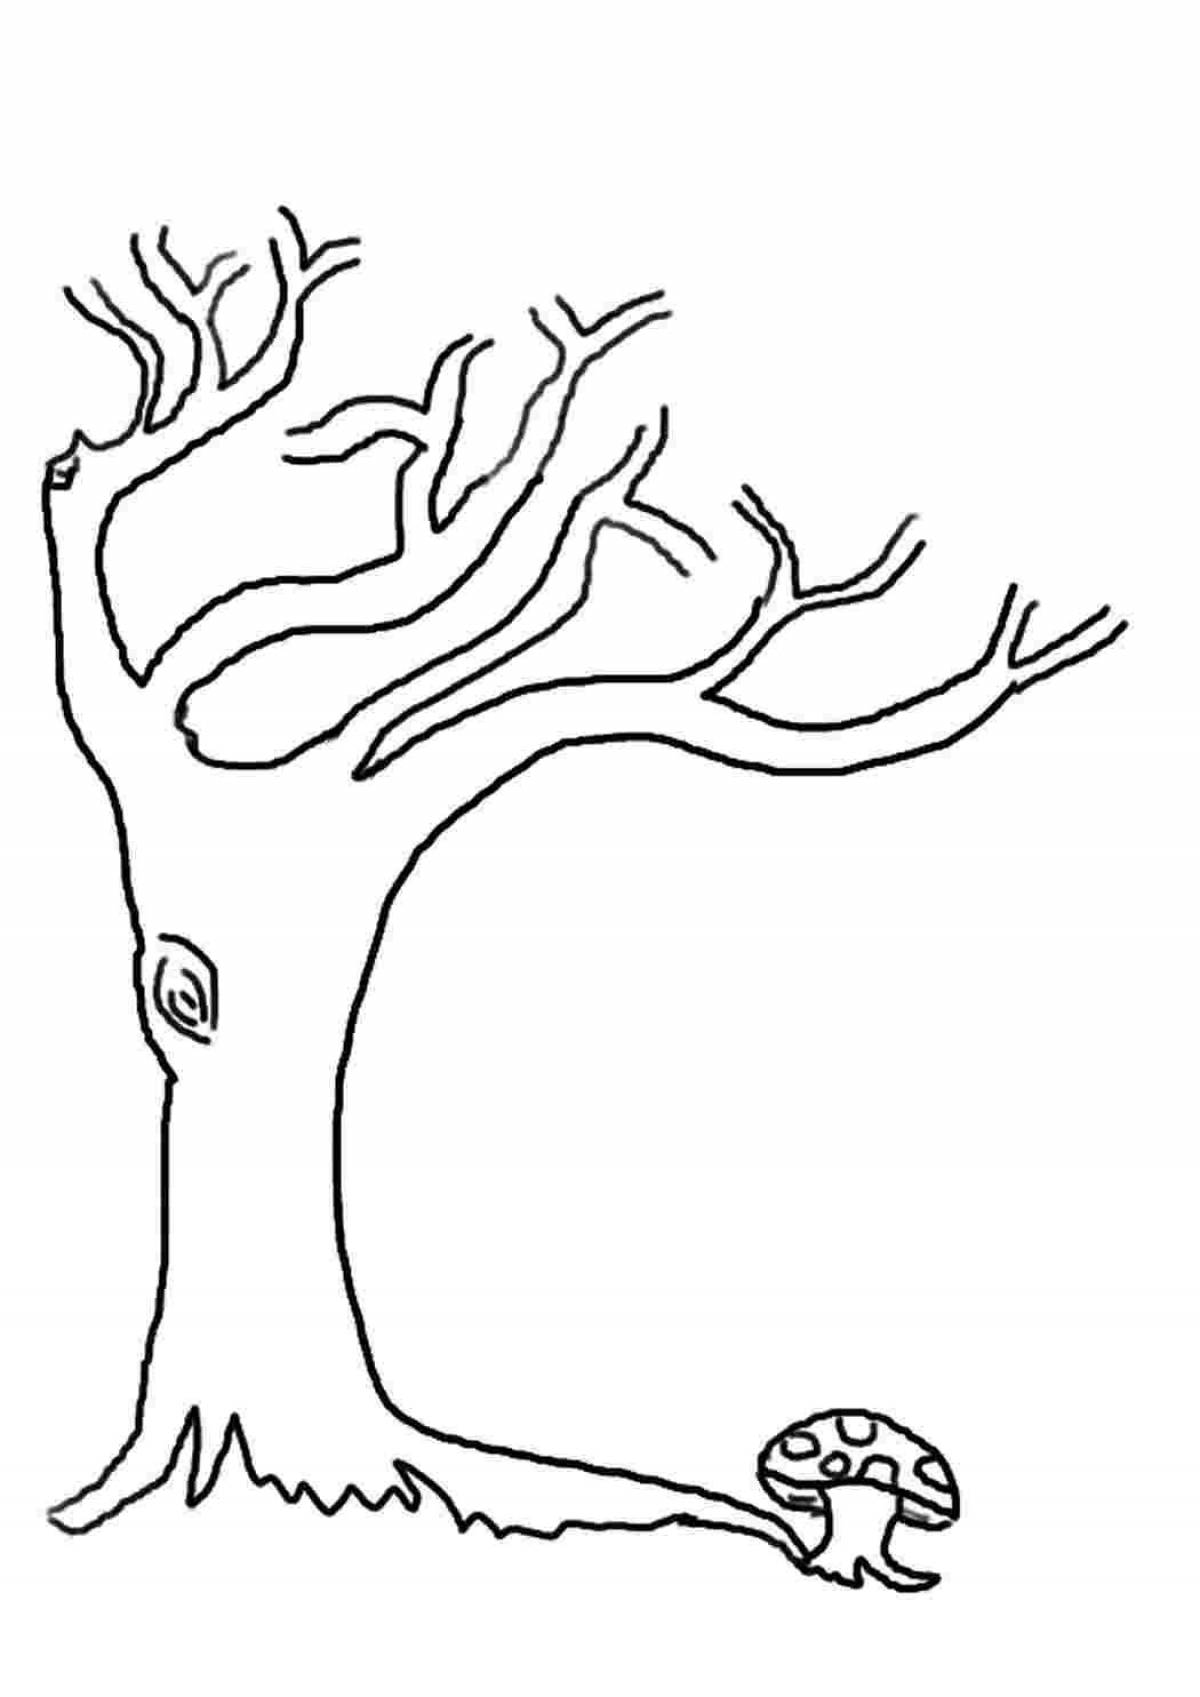 A cheerful tree without leaves coloring pages for children